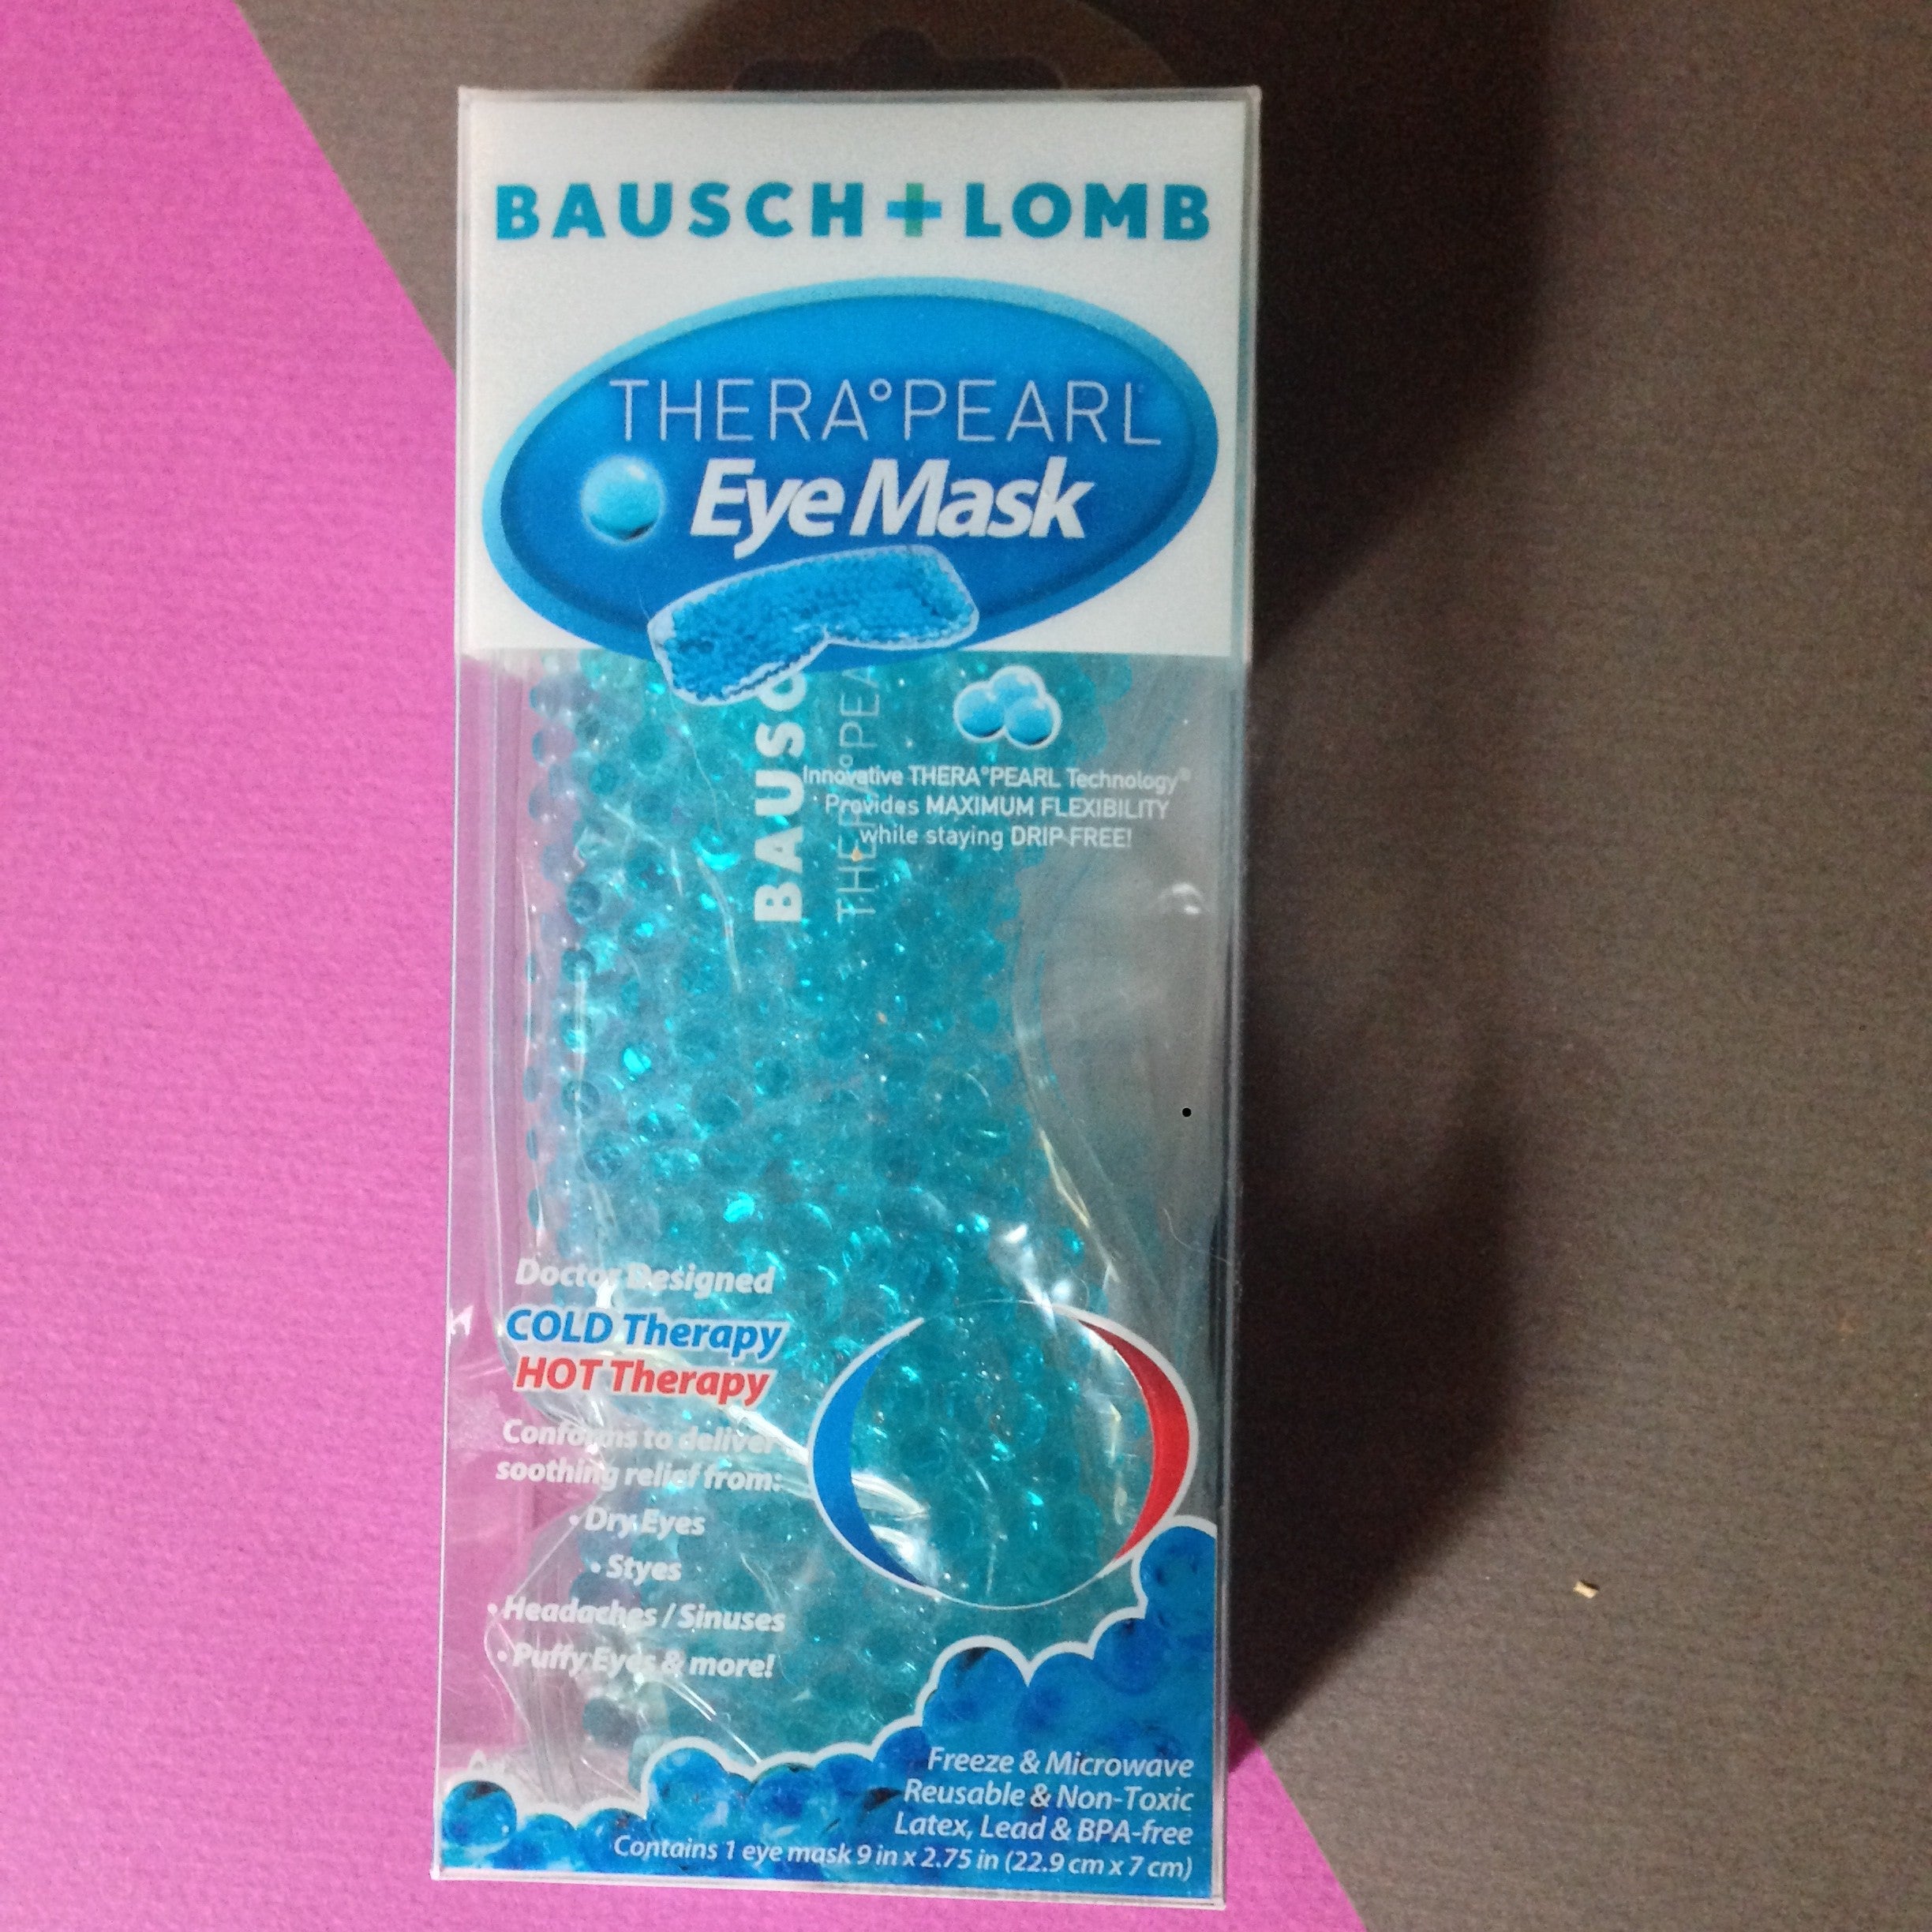 Review, Bausch, +, Lomb, THERA°PEARL®, Eye, Mask, How, To, Treat, Relieve, Common, Ailments, Dryness, Puffy, Eyes, Headaches, Sinus, Discomfort